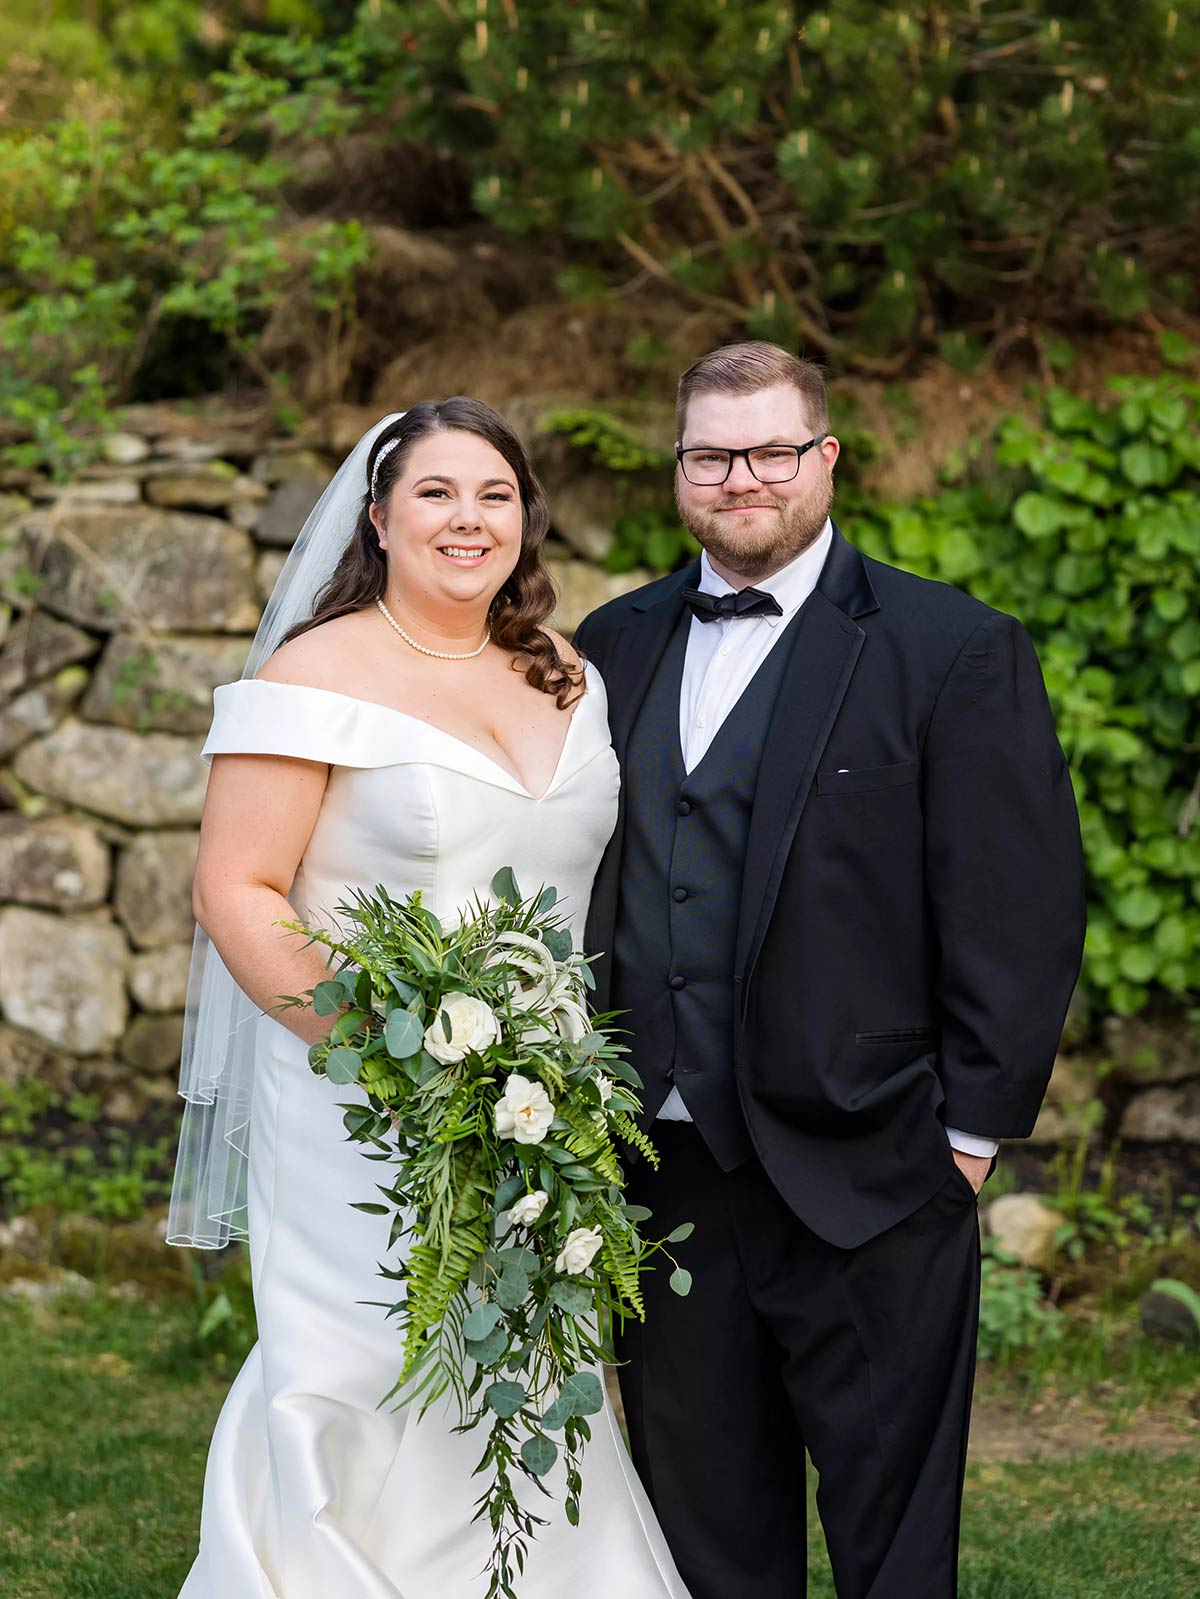 Portrait photograph of Isabelle Elsasser ’19 and Zack Kelley ’19 posing outside standing in wedding attire next to each other smiling in a forest grassy area